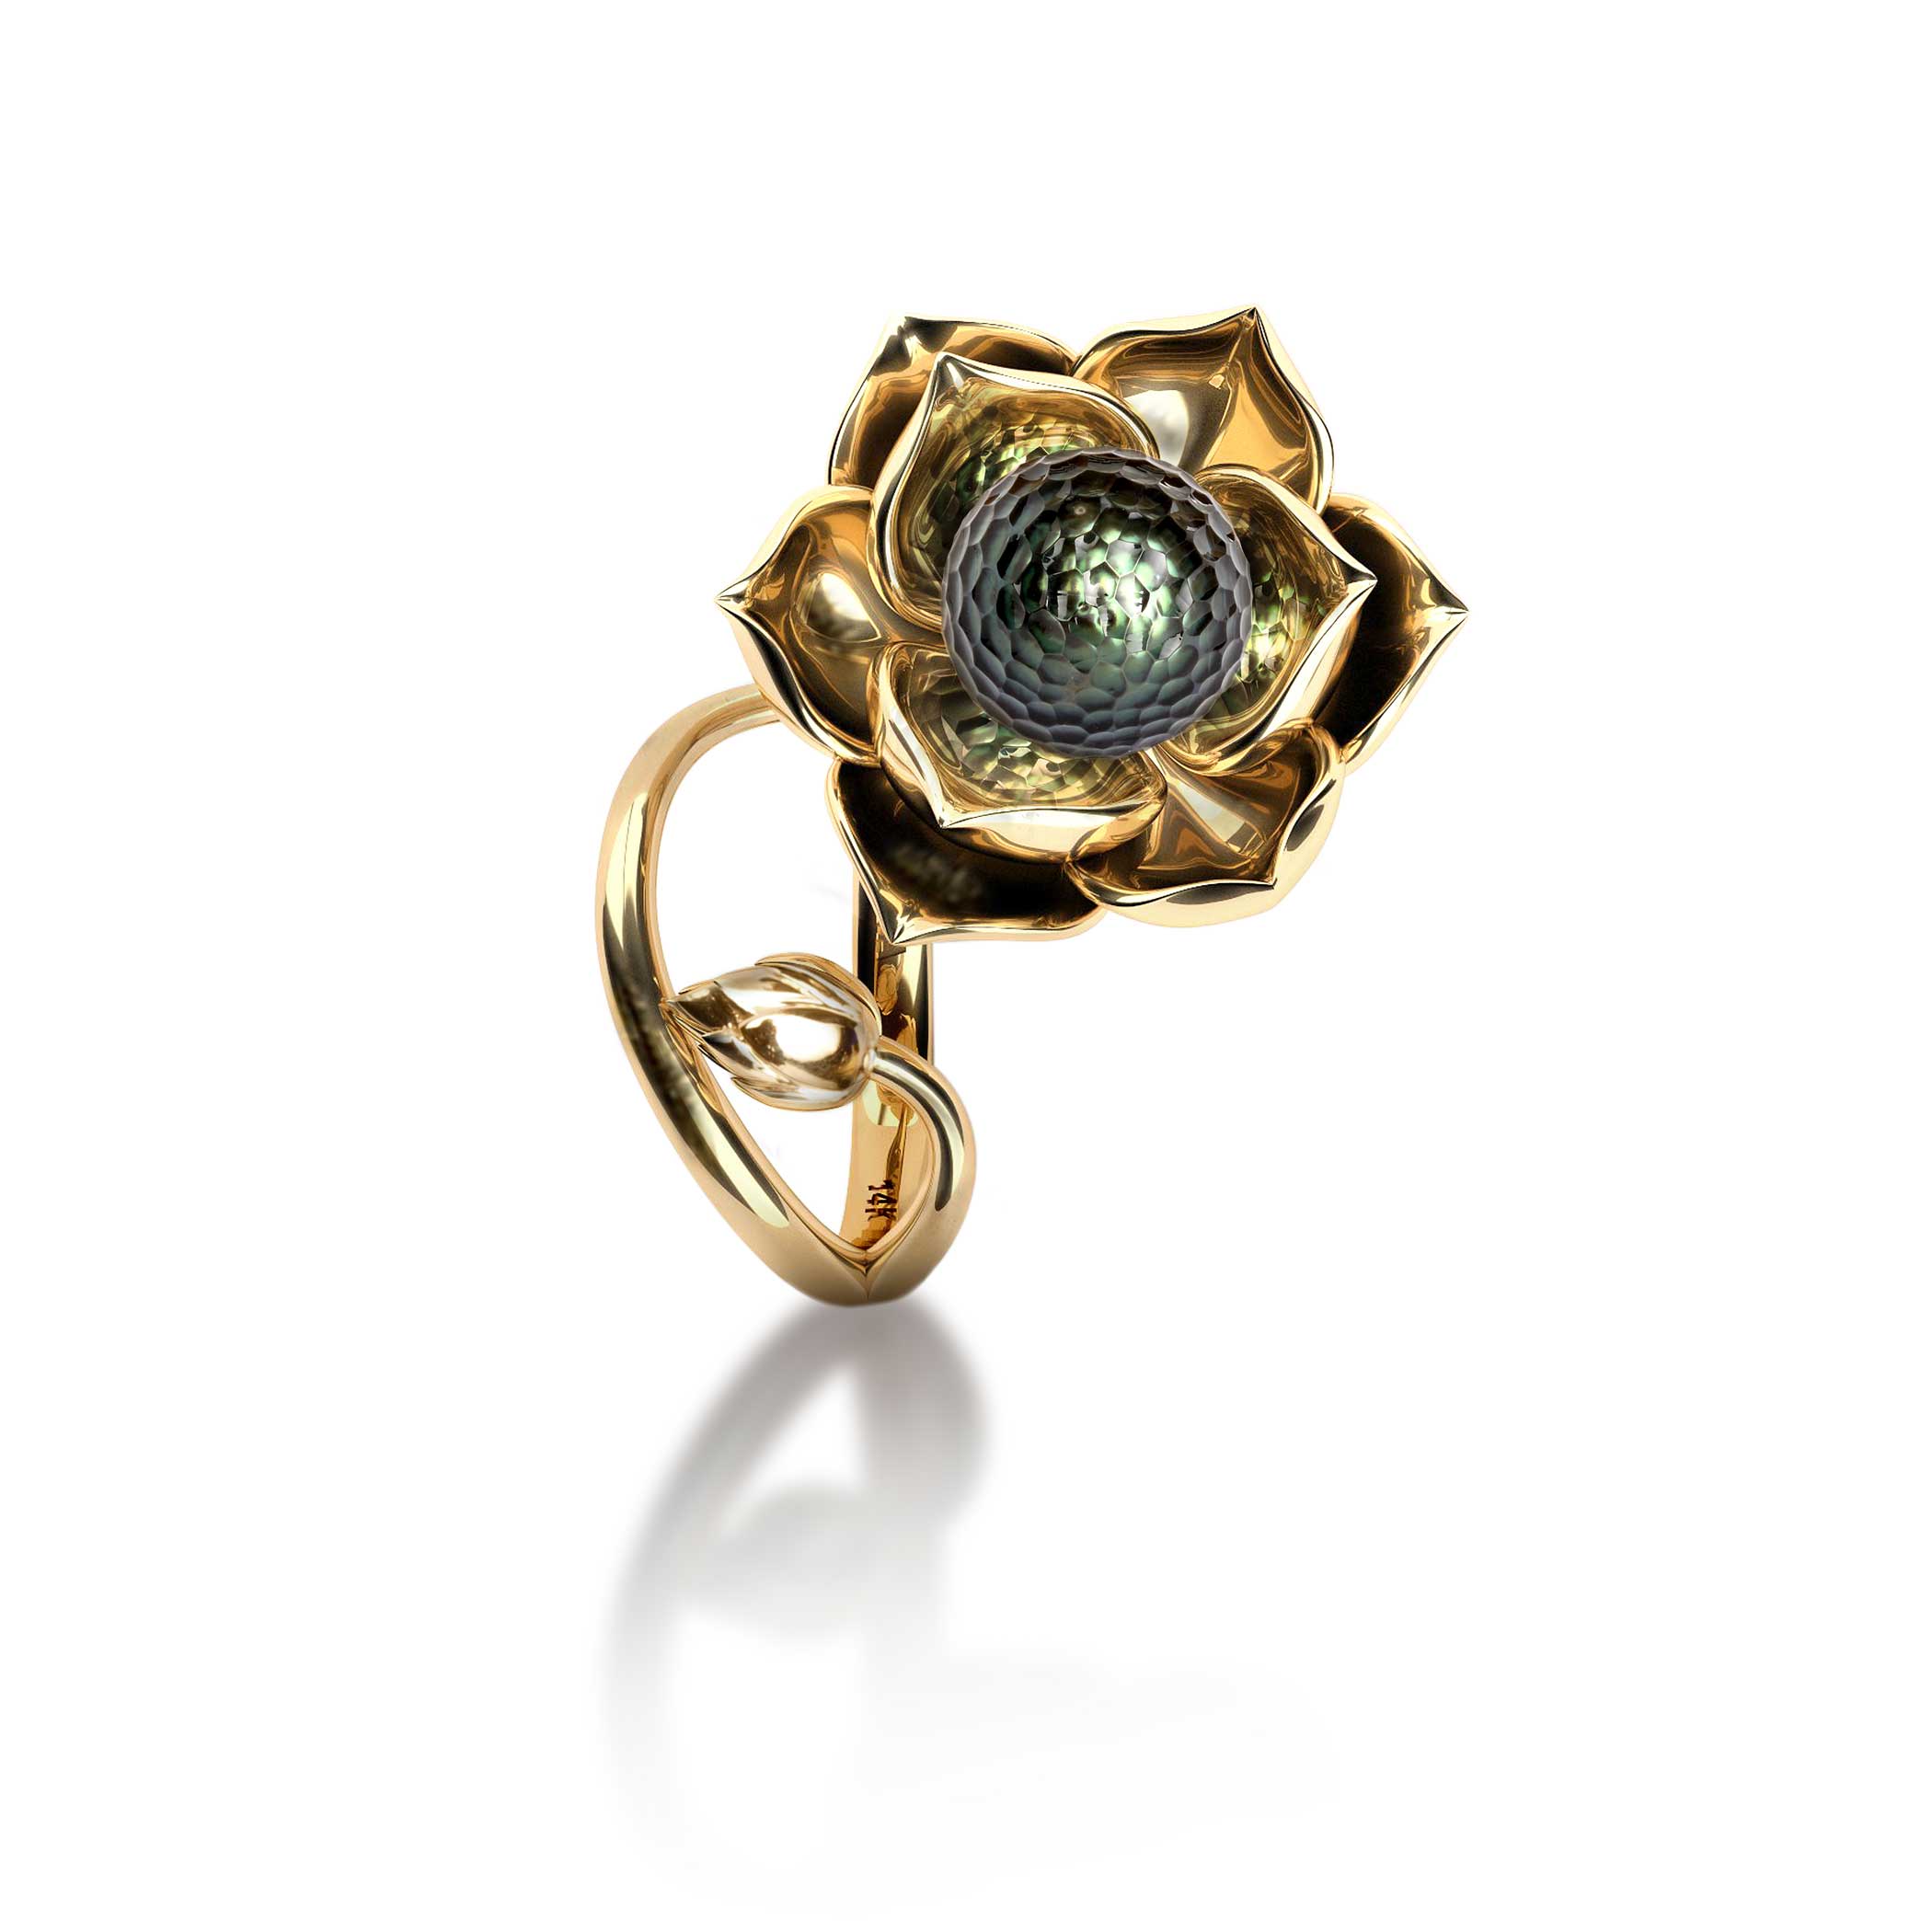 Hand-carved Tahitian pearl sits at the center of the 14k yellow gold "Lotus" NFC-enabled Momento Pearl(TM) ring from Galatea: Jewelry by Artist.